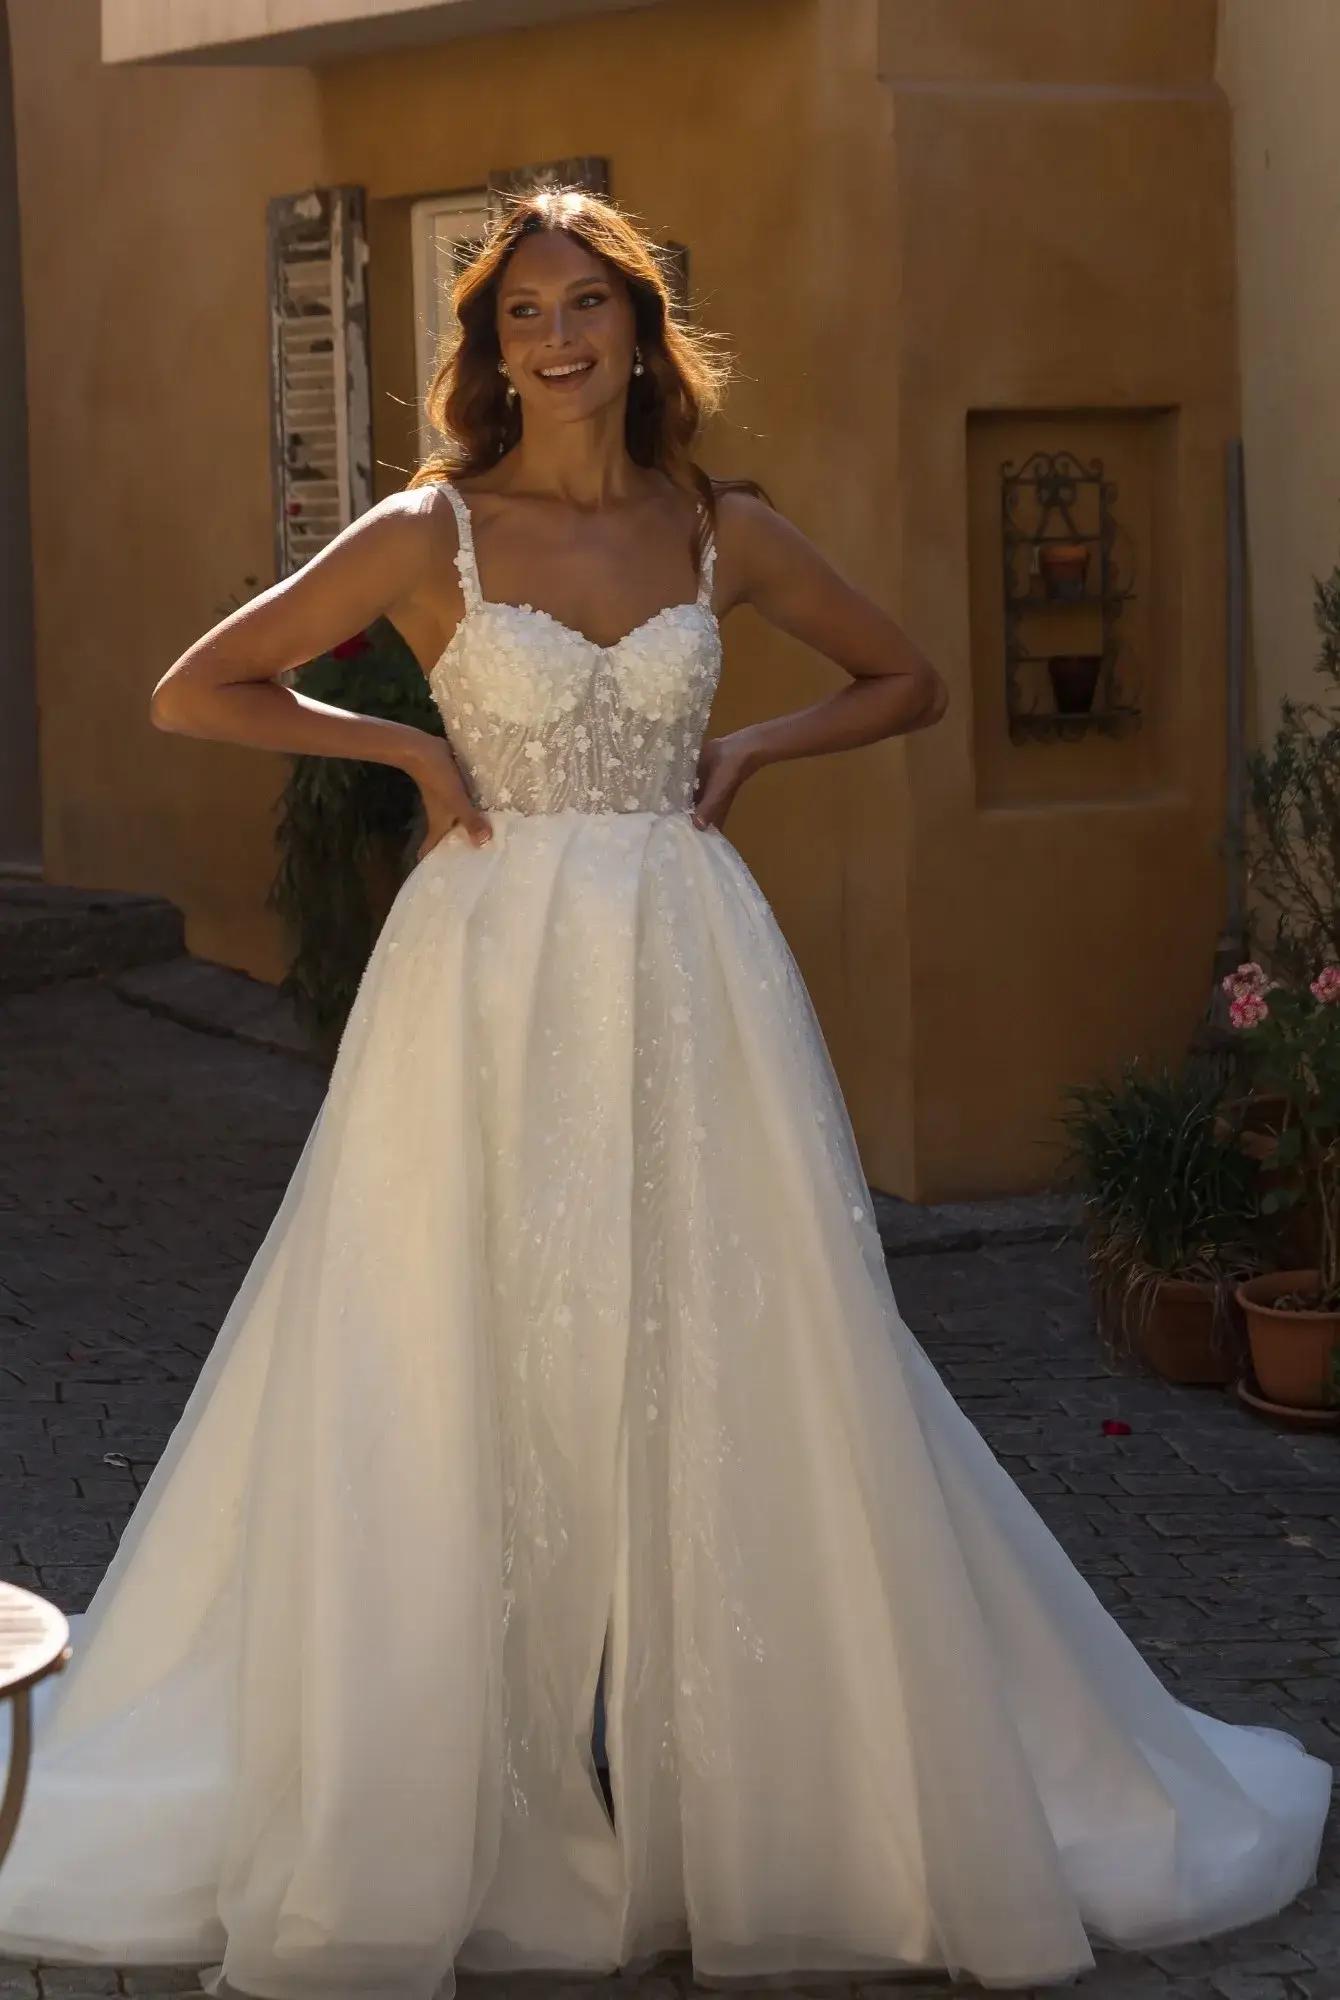 Top Wedding Dresses You Can’t Miss at The Bride Room&#39;s National Bridal Sale Image